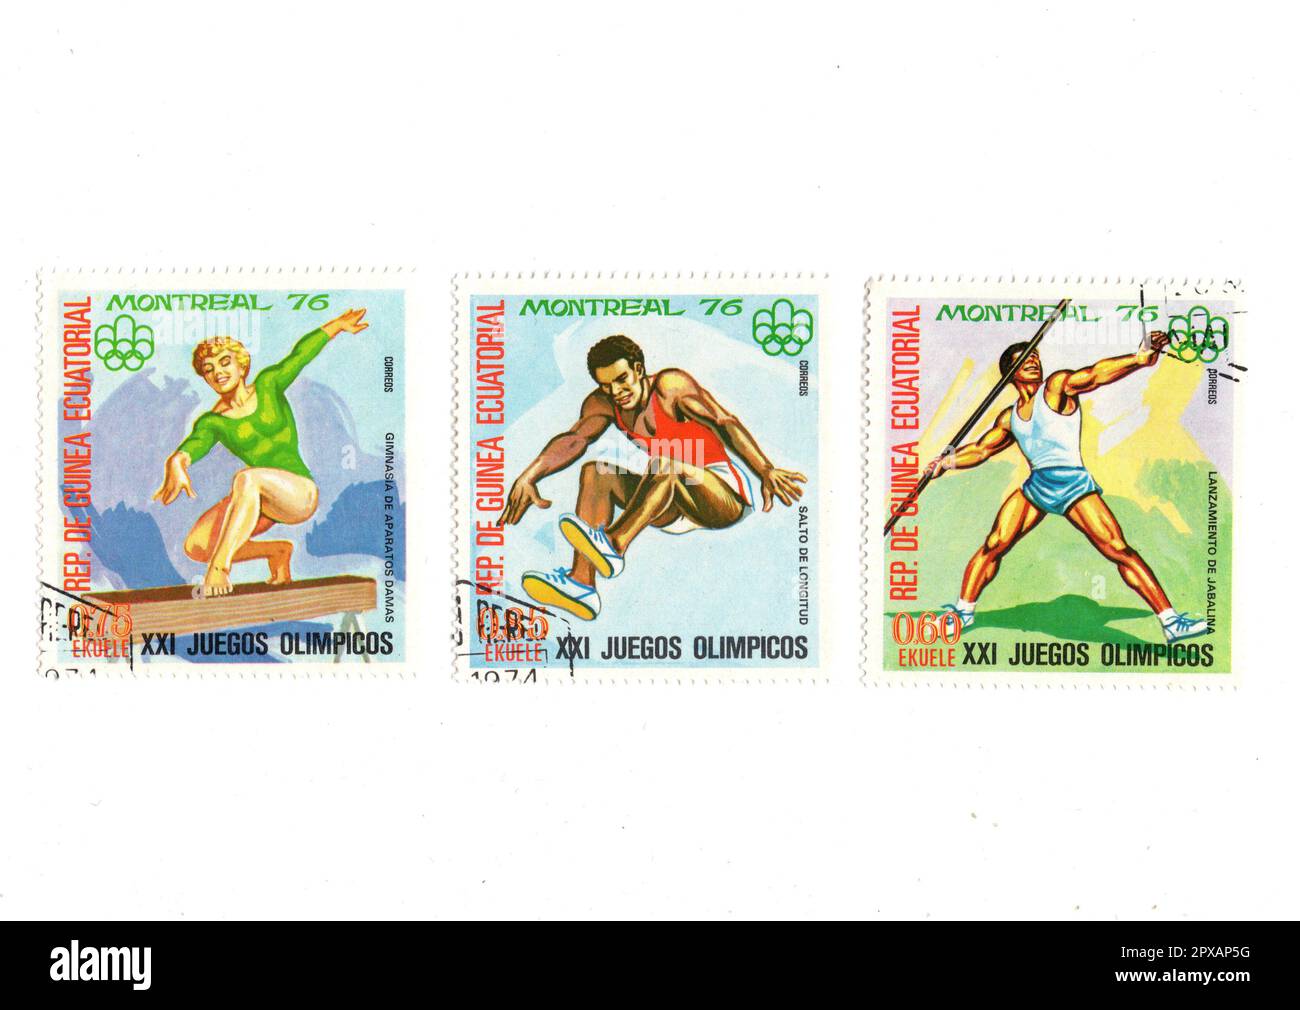 Vintage postage stamps from Equatorial Guinea isolated on a white background. Stock Photo